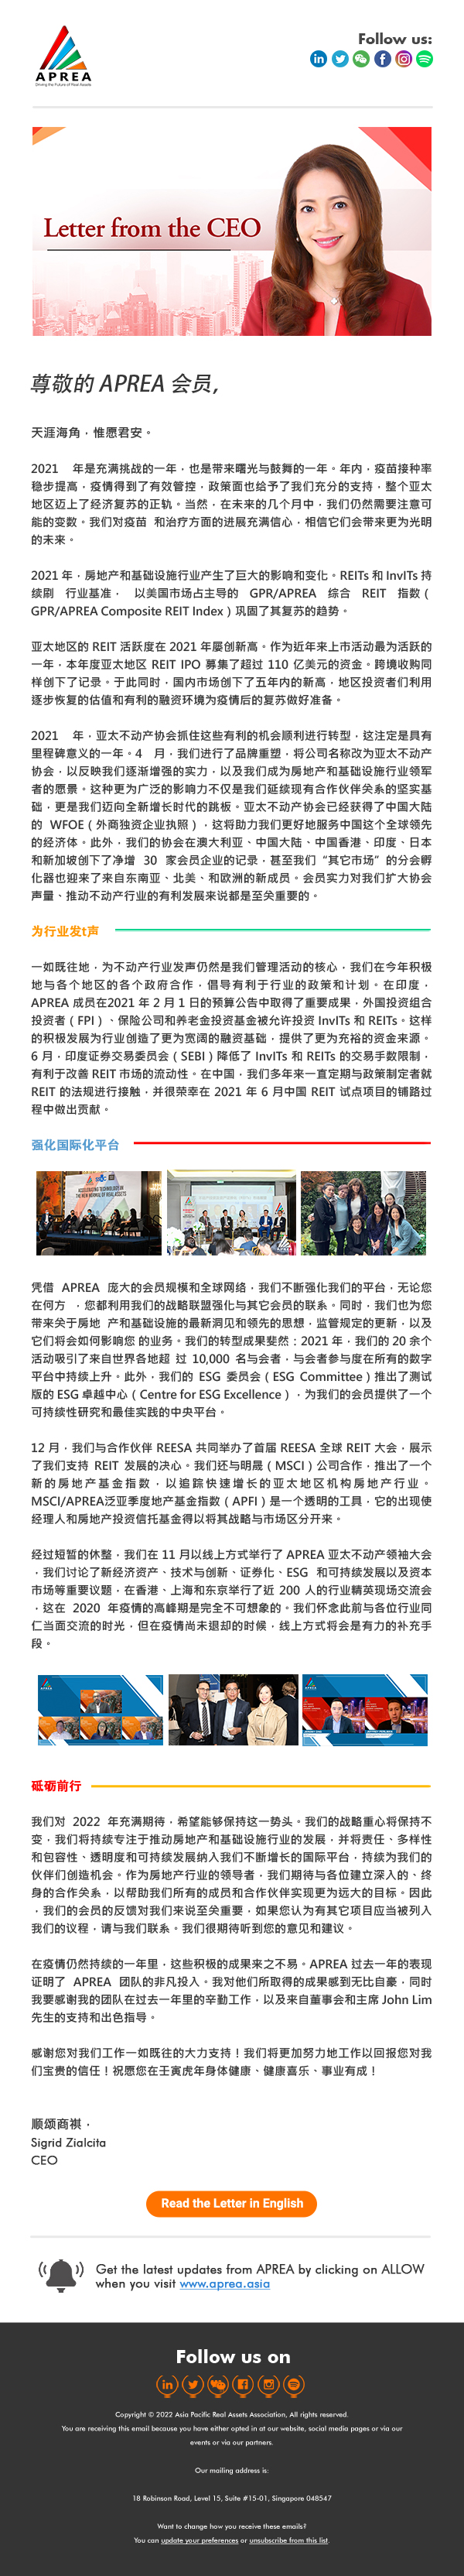 APREA Emailer January21 Chinese